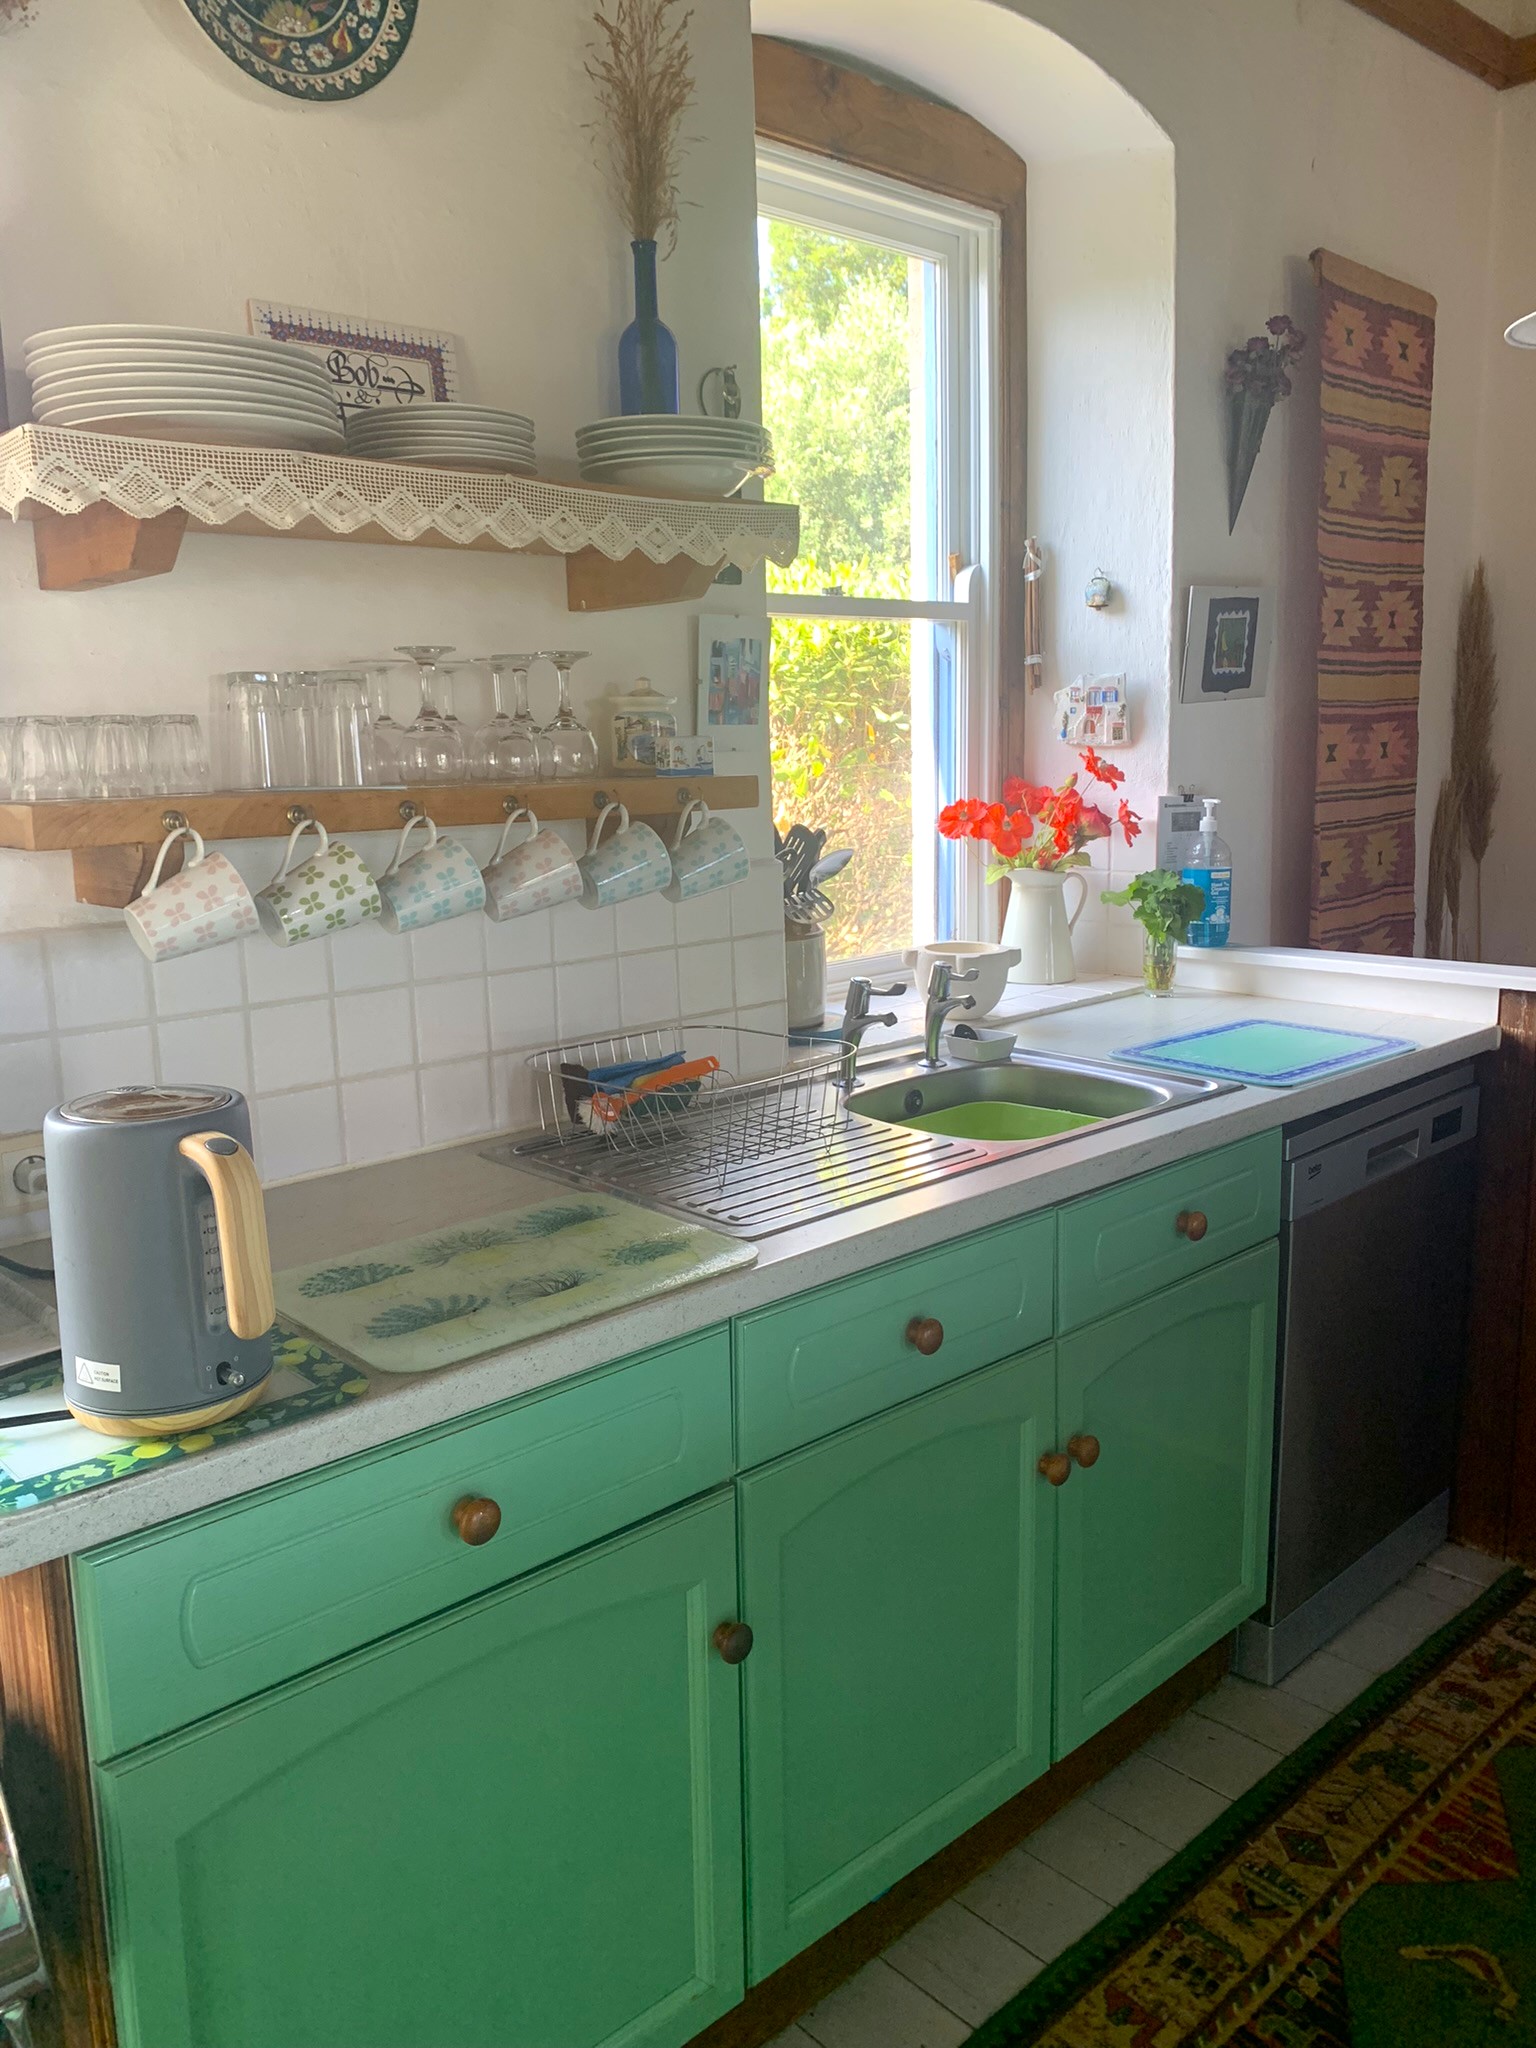 Kitchen of house for sale in Ithaca Greece, Lahos